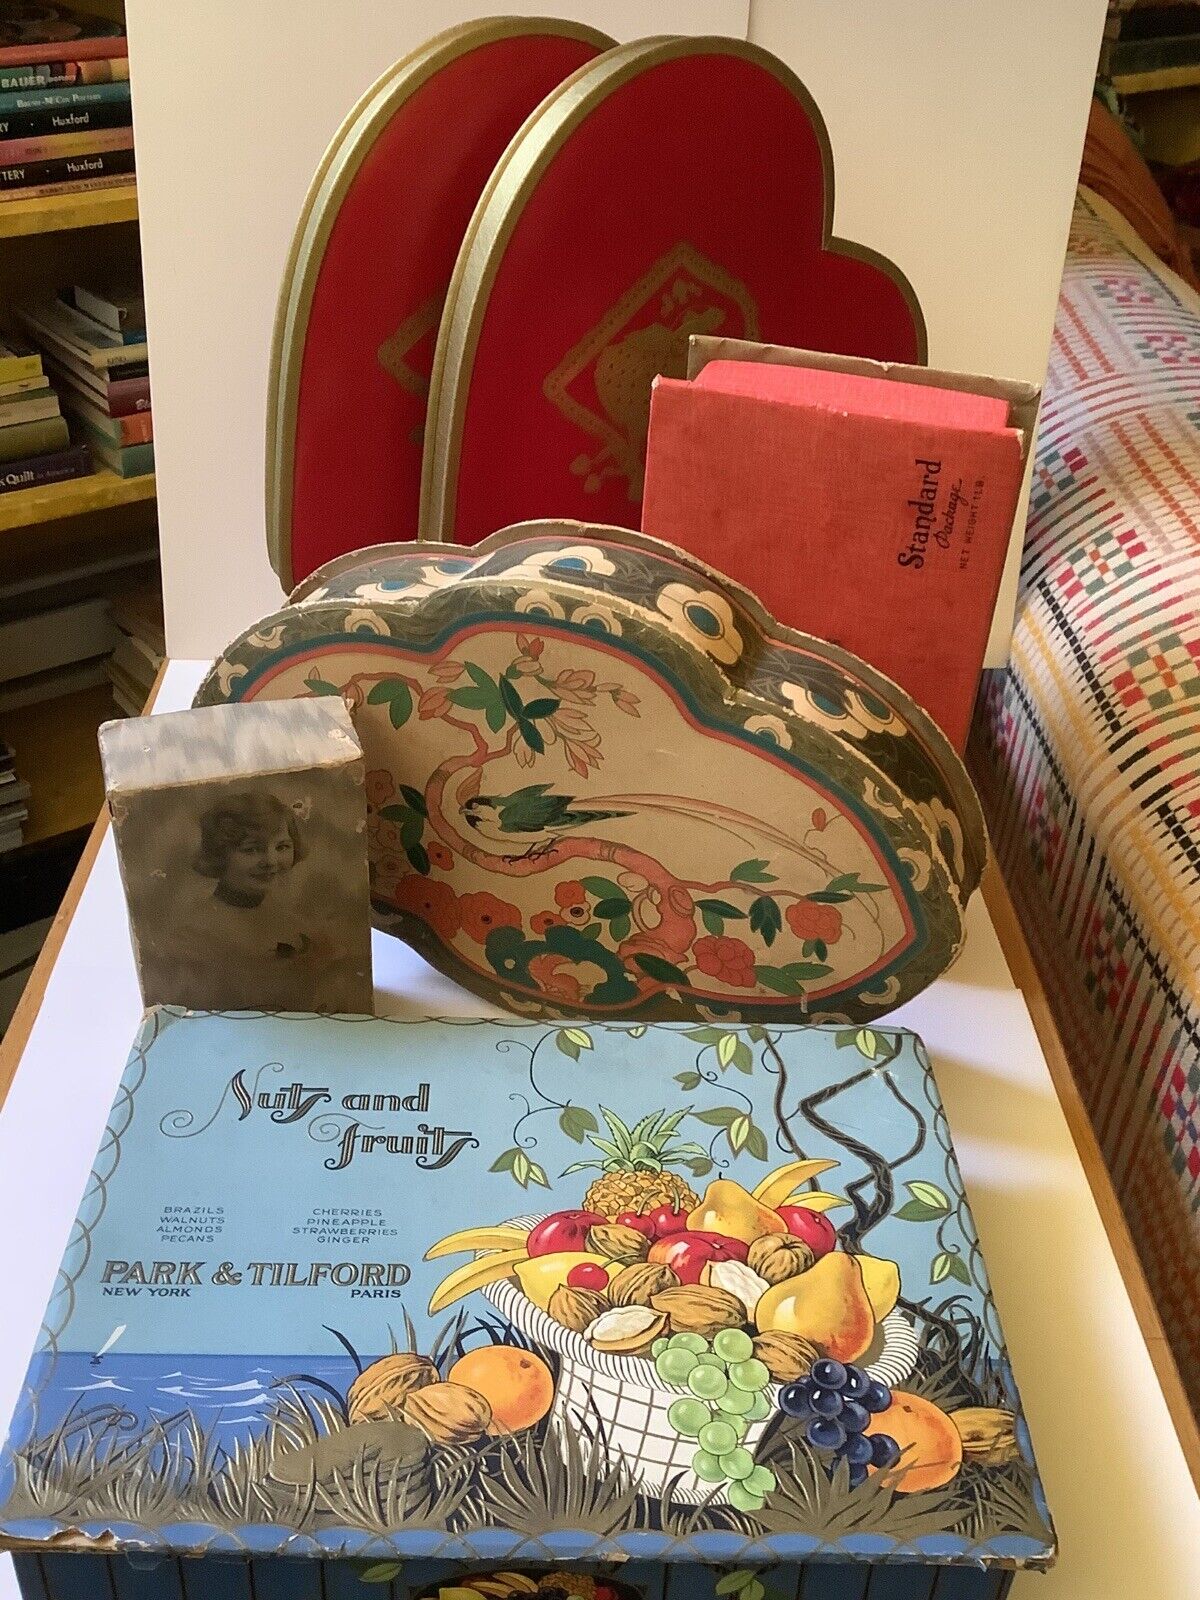 1920-50’ Vintage Candy Boxes Lot of 5 Colorful Candy Boxes w/Beautiful Designs